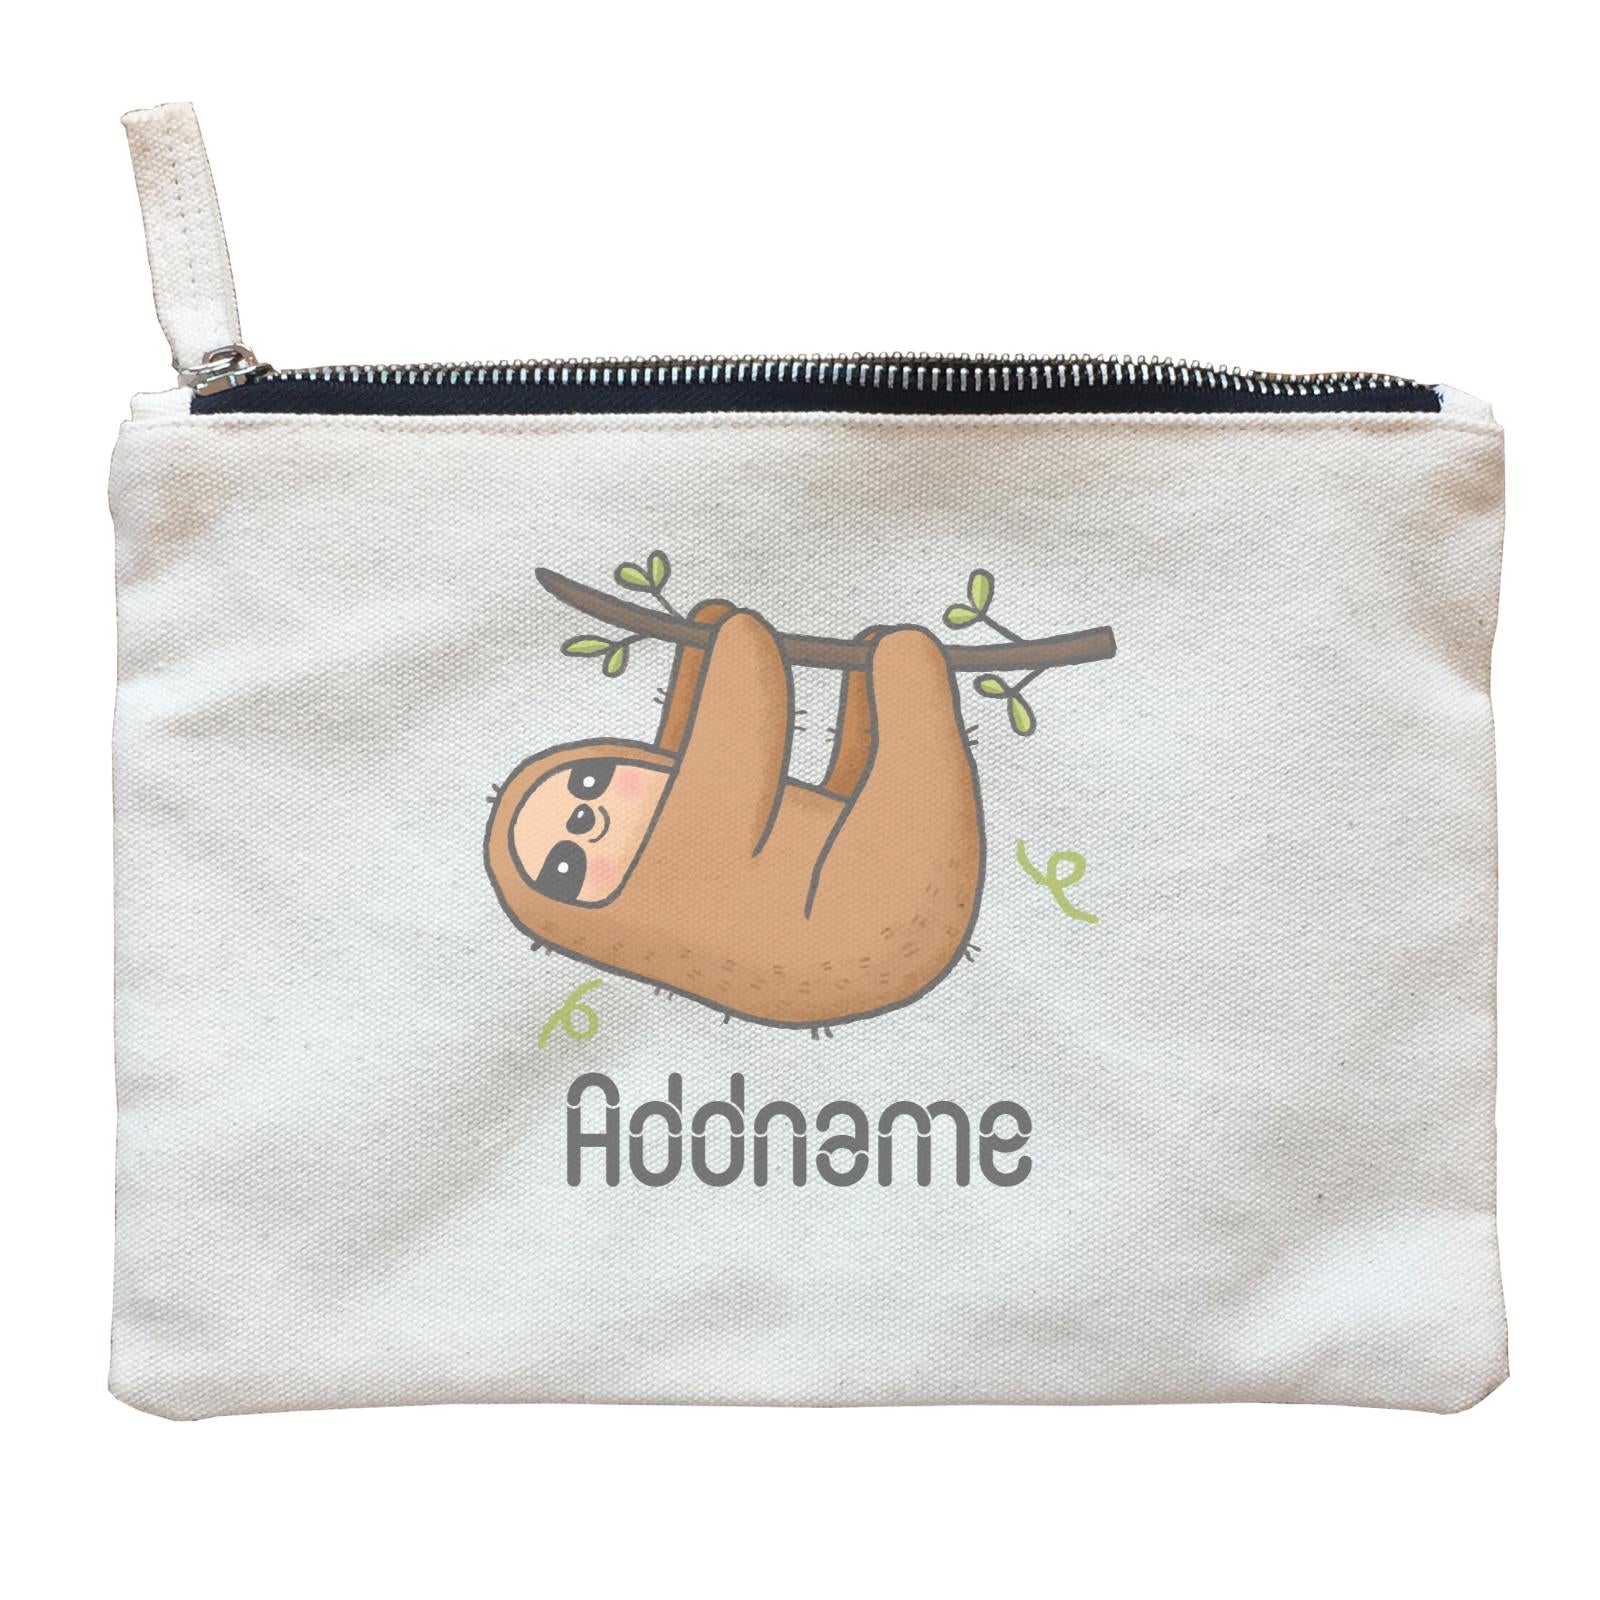 Cute Hand Drawn Style Sloth Addname Zipper Pouch